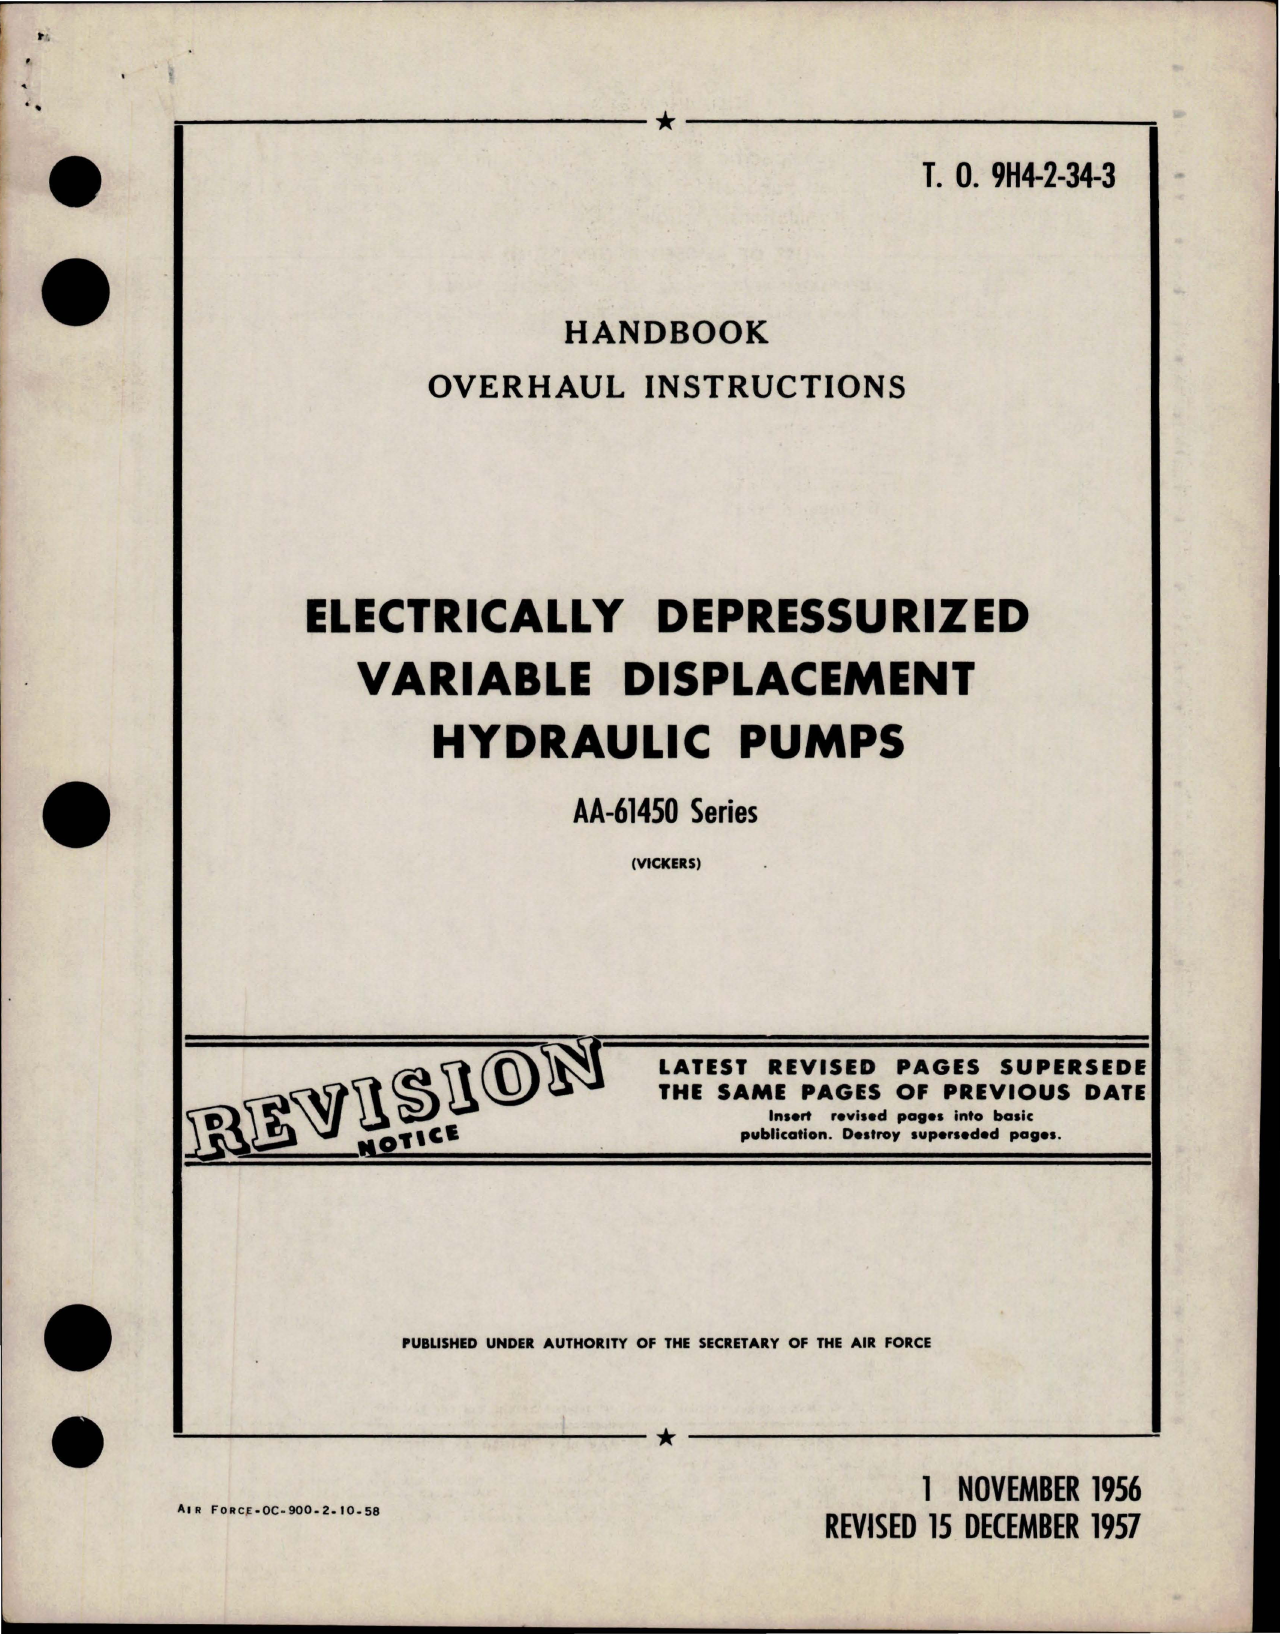 Sample page 1 from AirCorps Library document: Overhaul Instructions for Electrically Depressurized Variable Displacement Hydraulic Pumps - AA-61450 Series 